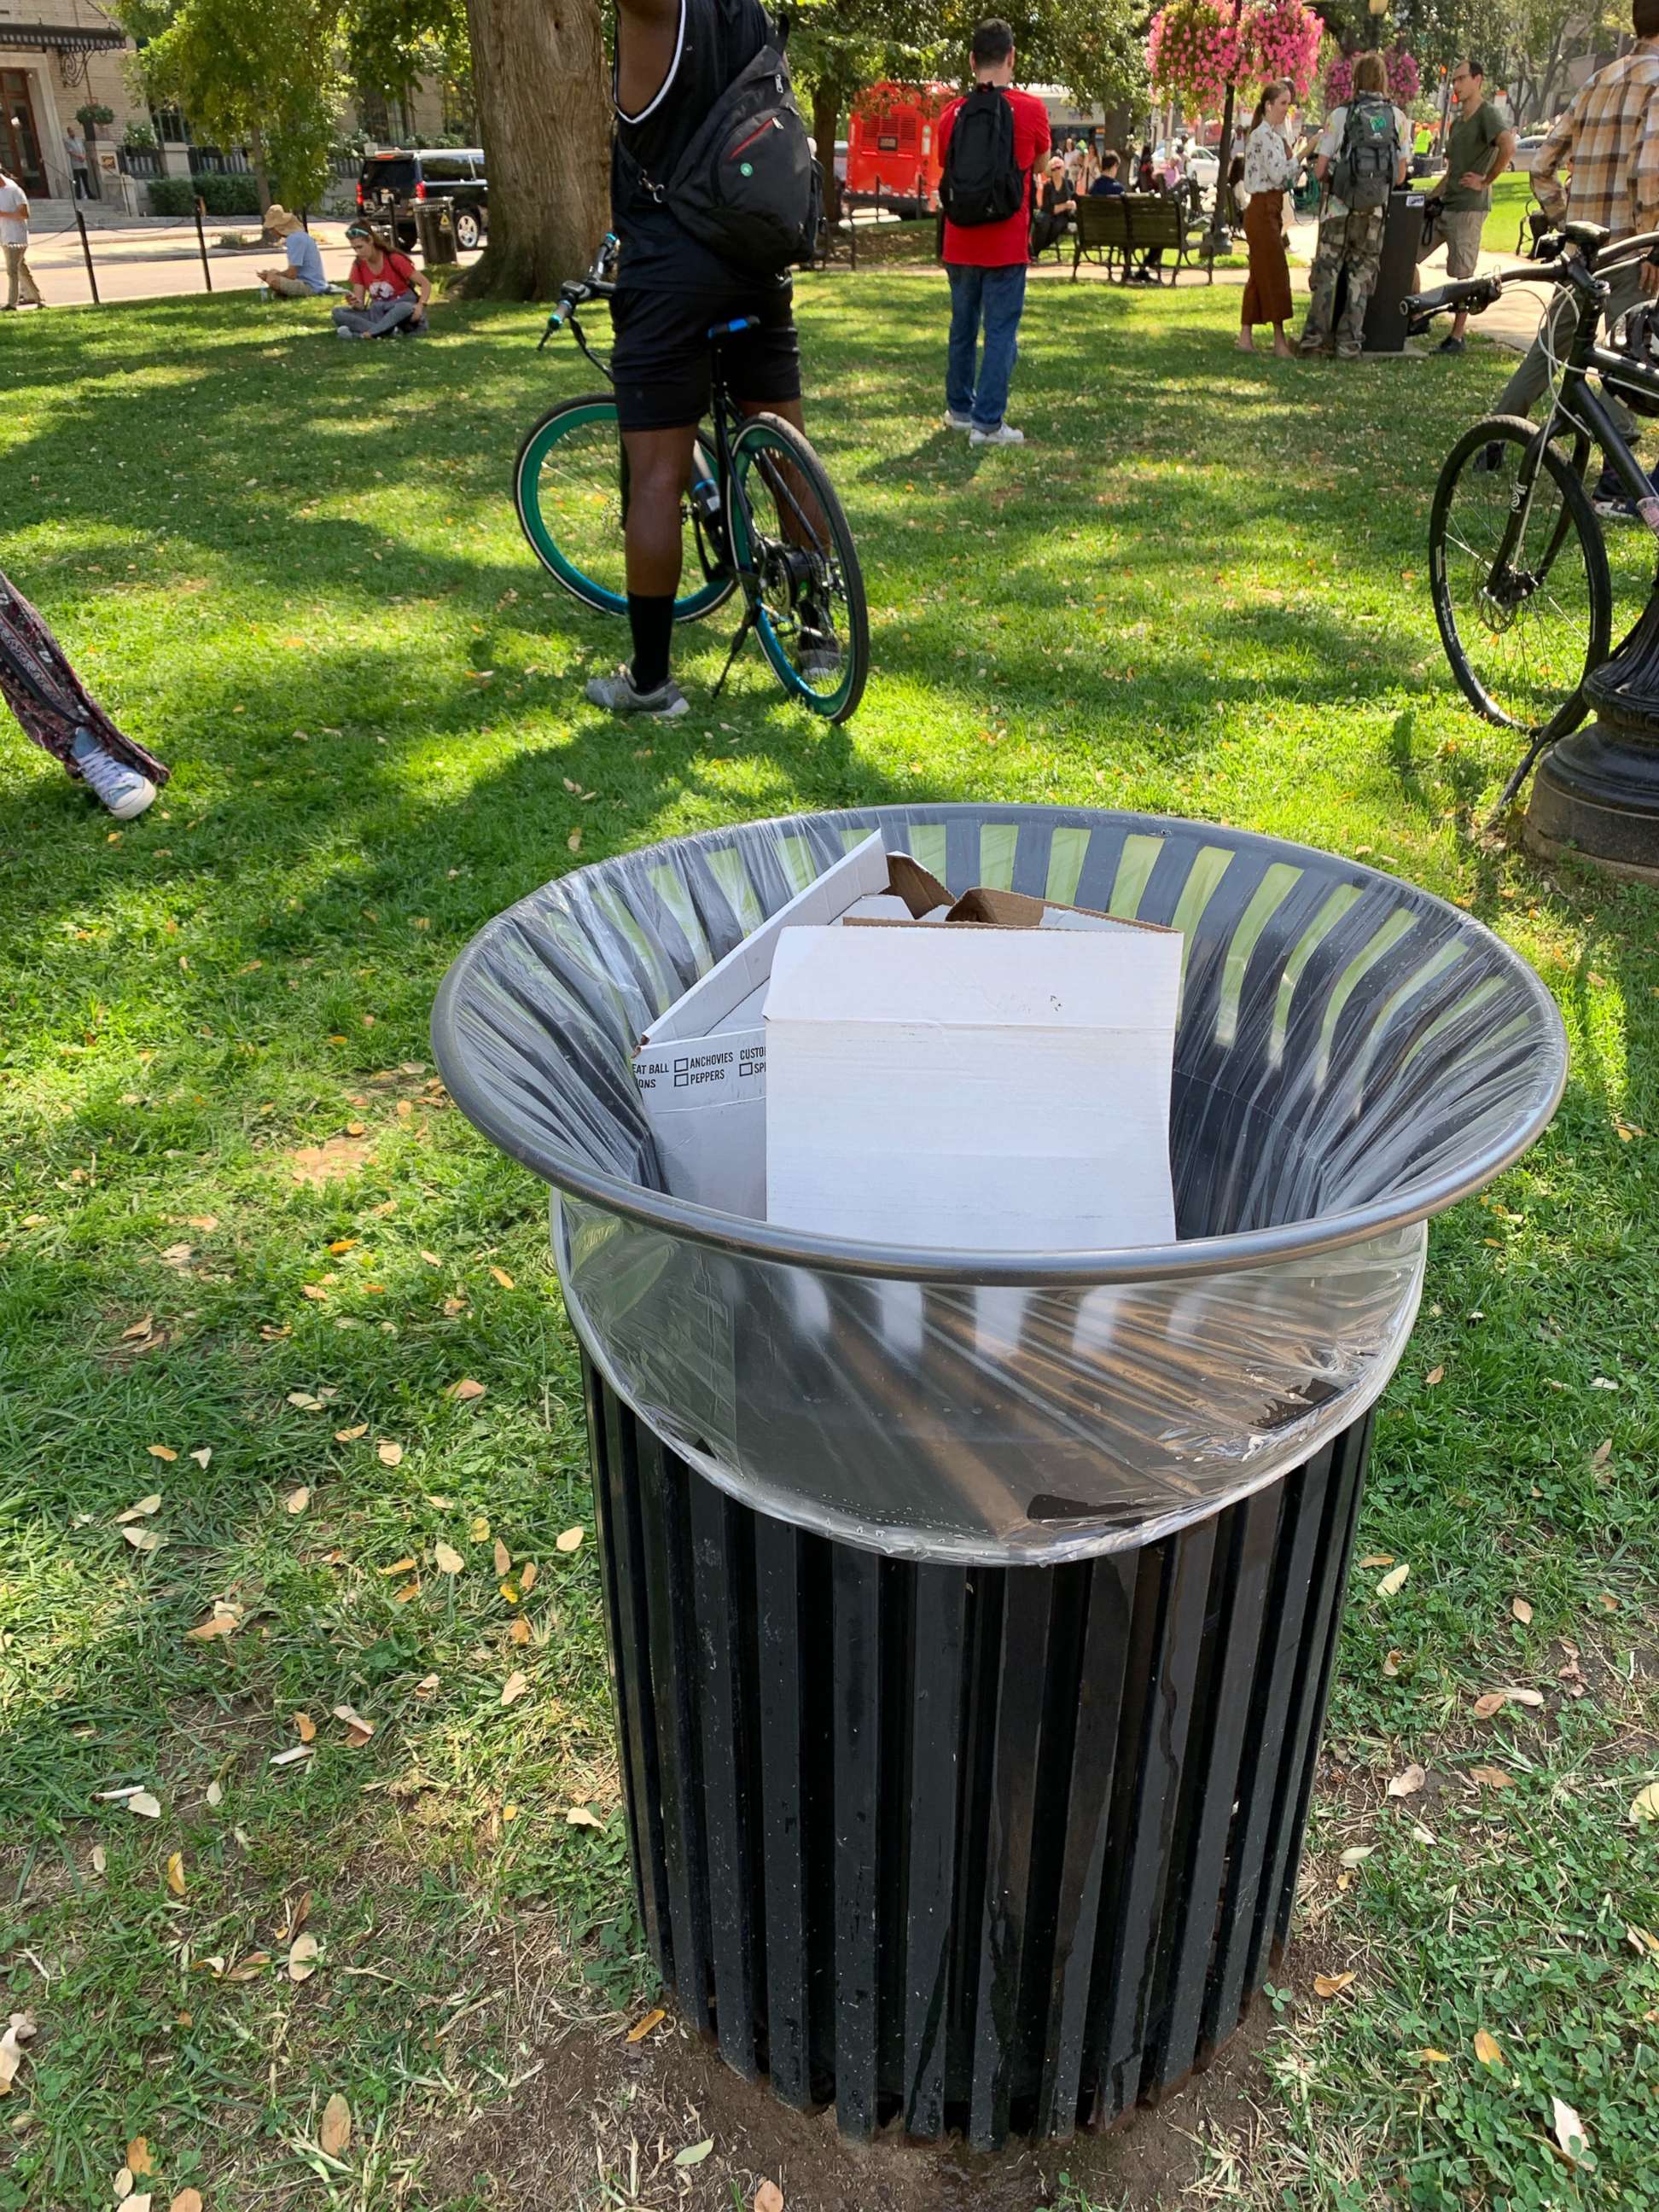 PHOTO: Climate change activists ate pizza after their protest finished in Washington on September 23rd, 2019. Some of the boxes were thrown away in trash cans.